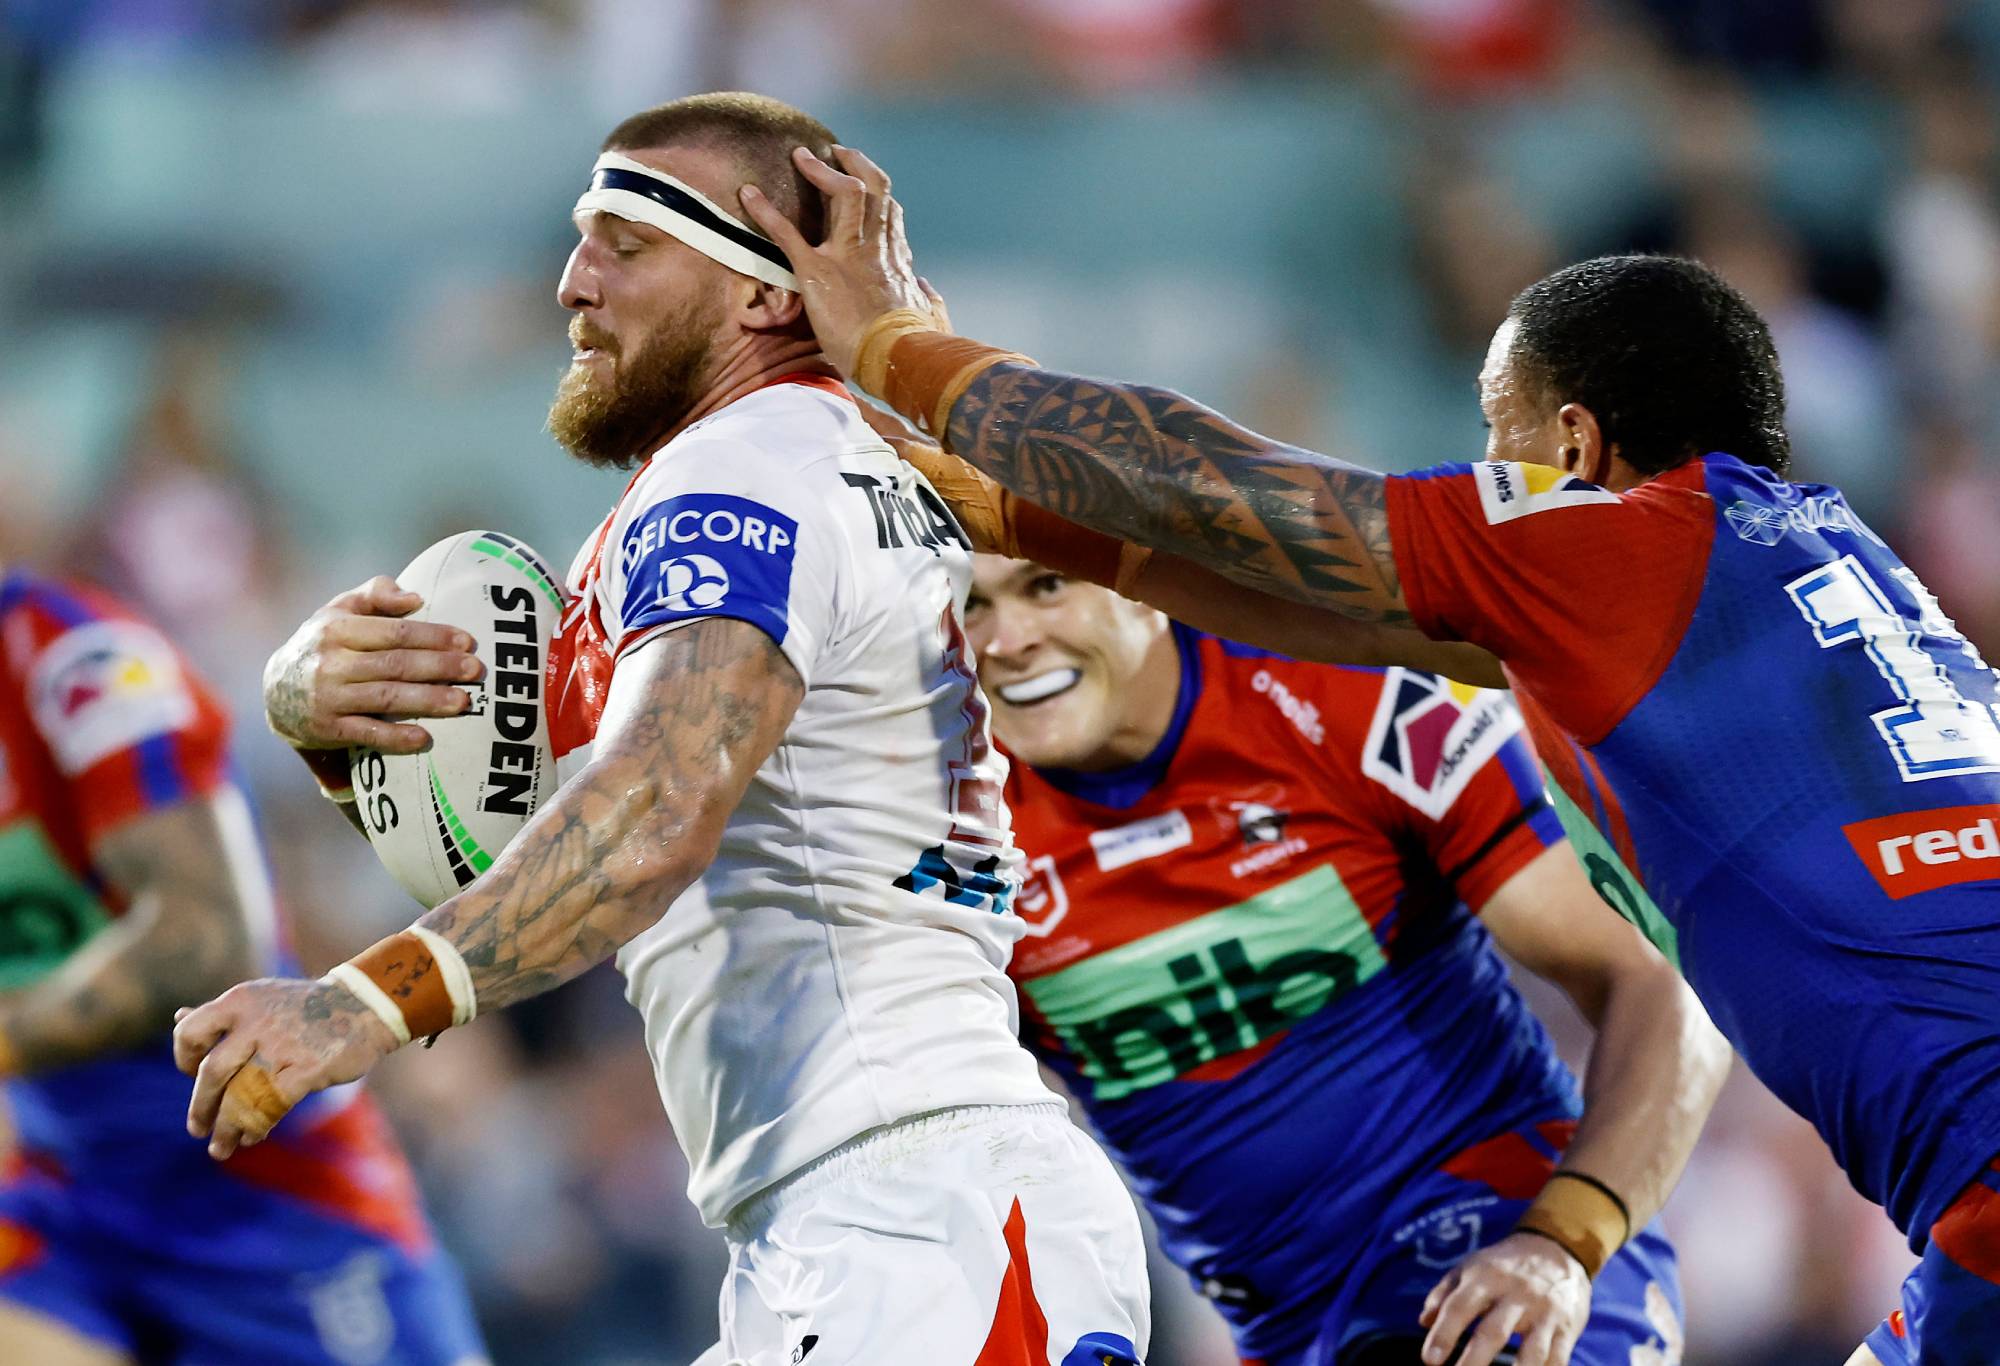 WOLLONGONG, AUSTRALIA - APRIL 17: Dragons' Josh McGuire avoids a tackle from Knights' Tyson Frizell during the NRL Round 6 match between St George Illawarra Dragons and Newcastle Knights at WIN Stadium on April 17, 2022, in Wollongong, Australia.  (Photo by Mark Evans/Getty Images)